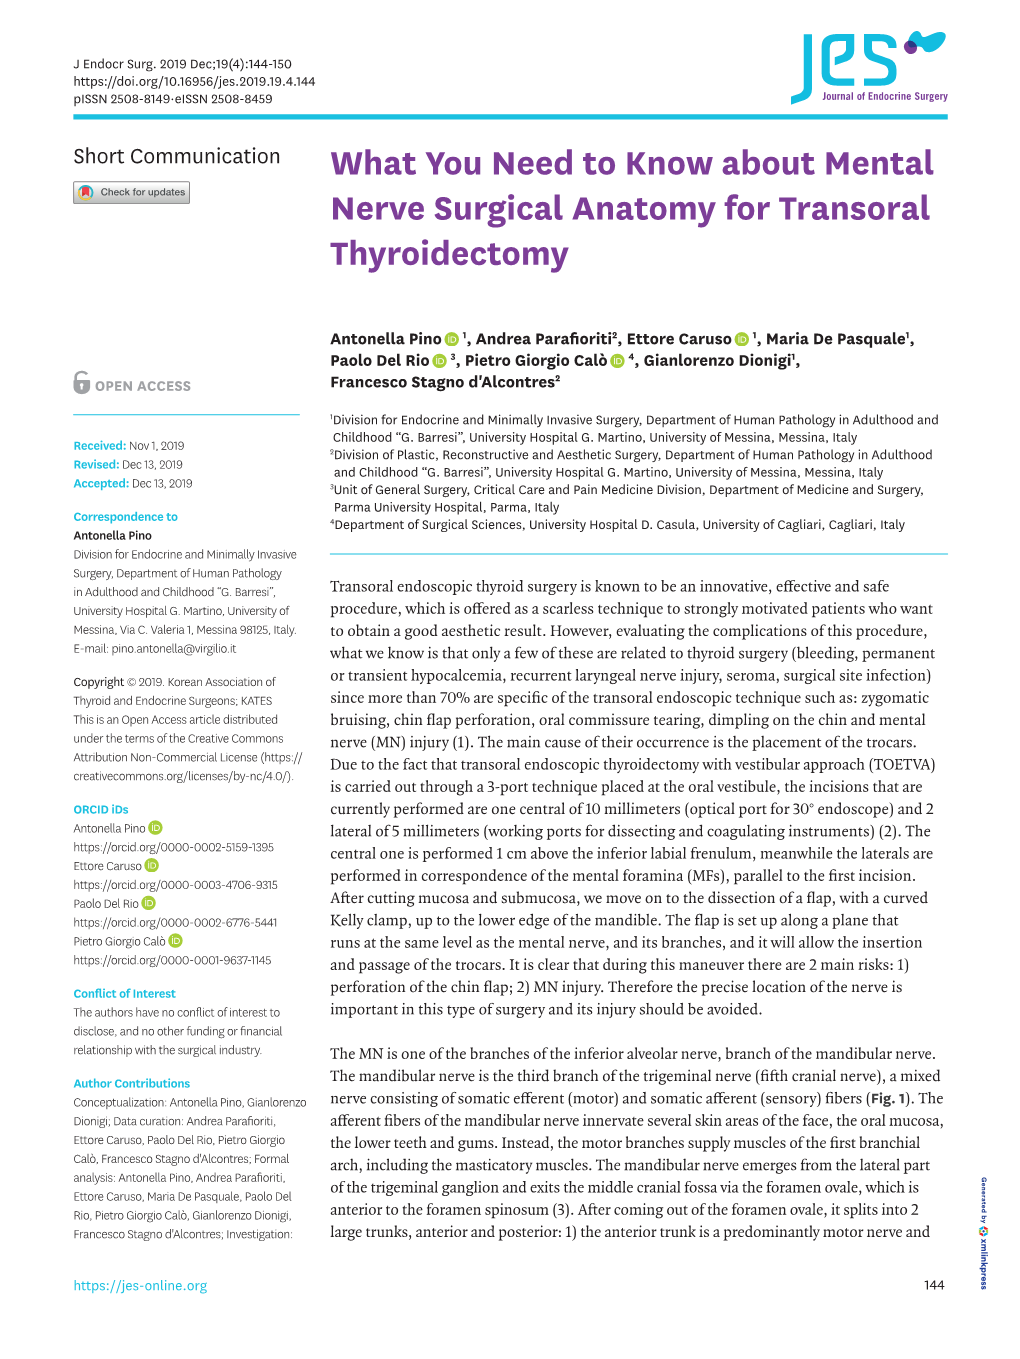 What You Need to Know About Mental Nerve Surgical Anatomy for Transoral Thyroidectomy